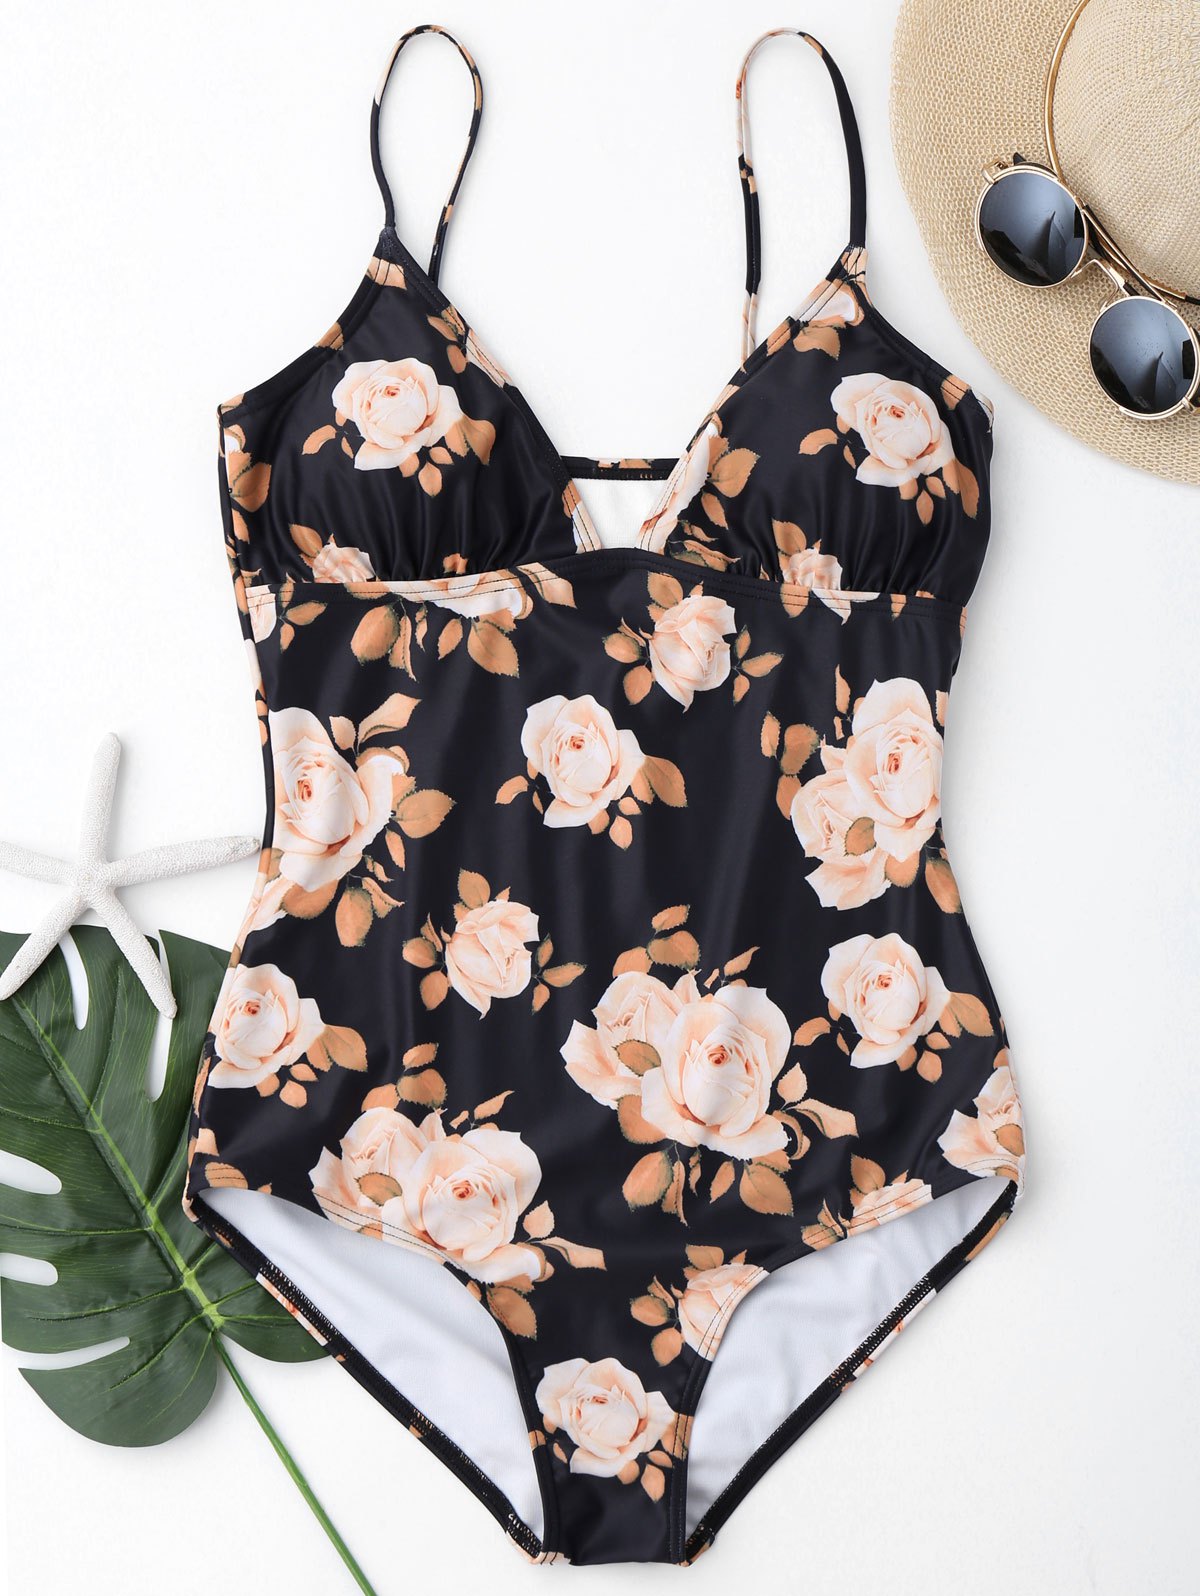 Padded Floral Cami Swimsuit - Black L on Luulla